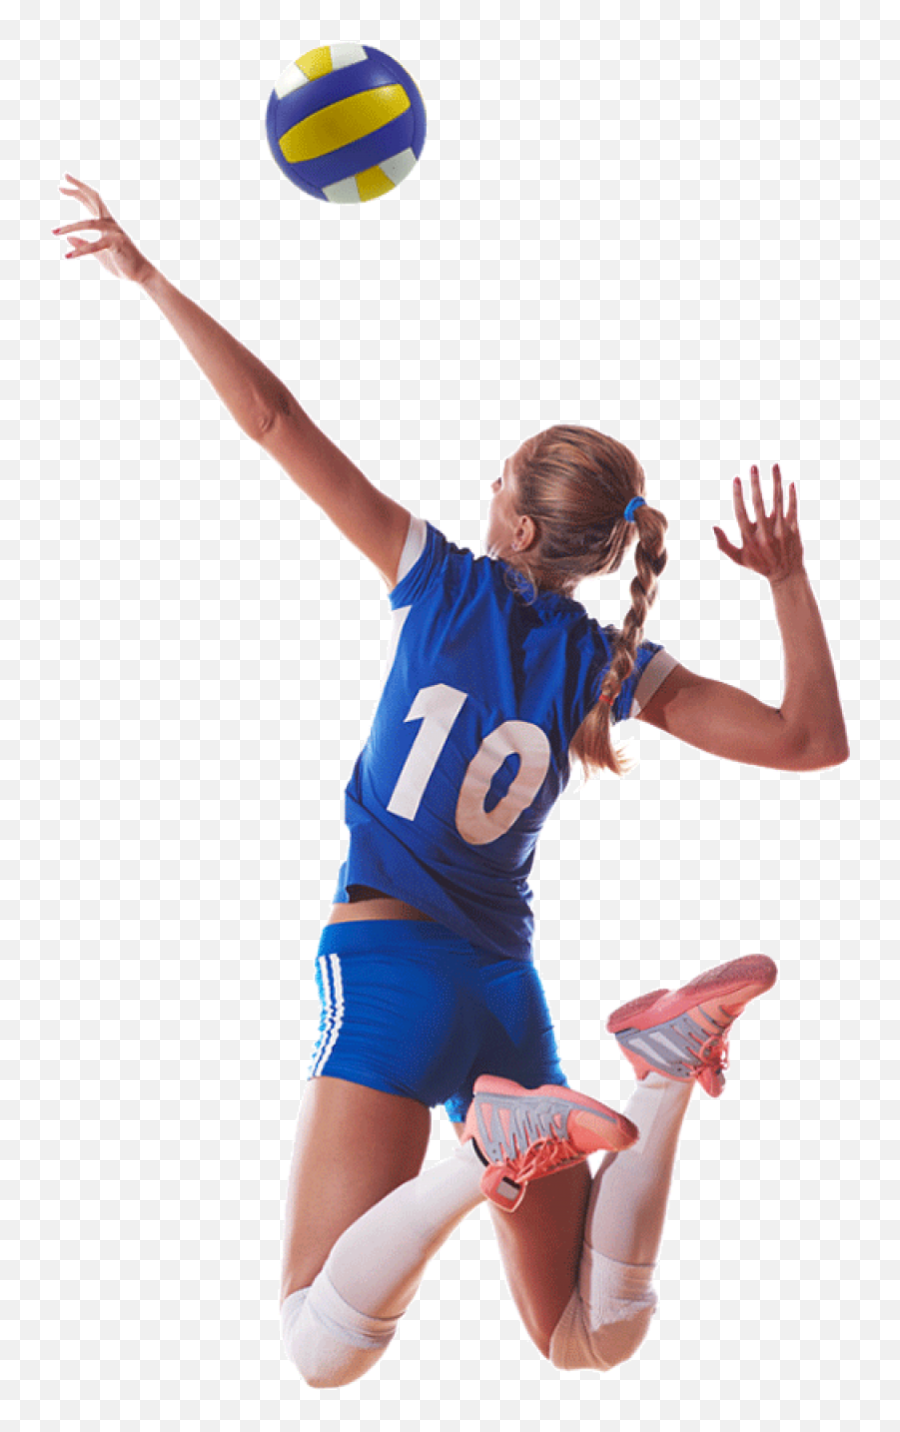 Volleyball Player Png Image - Transparent Background Volleyball Player Png,Volleyball Transparent Background